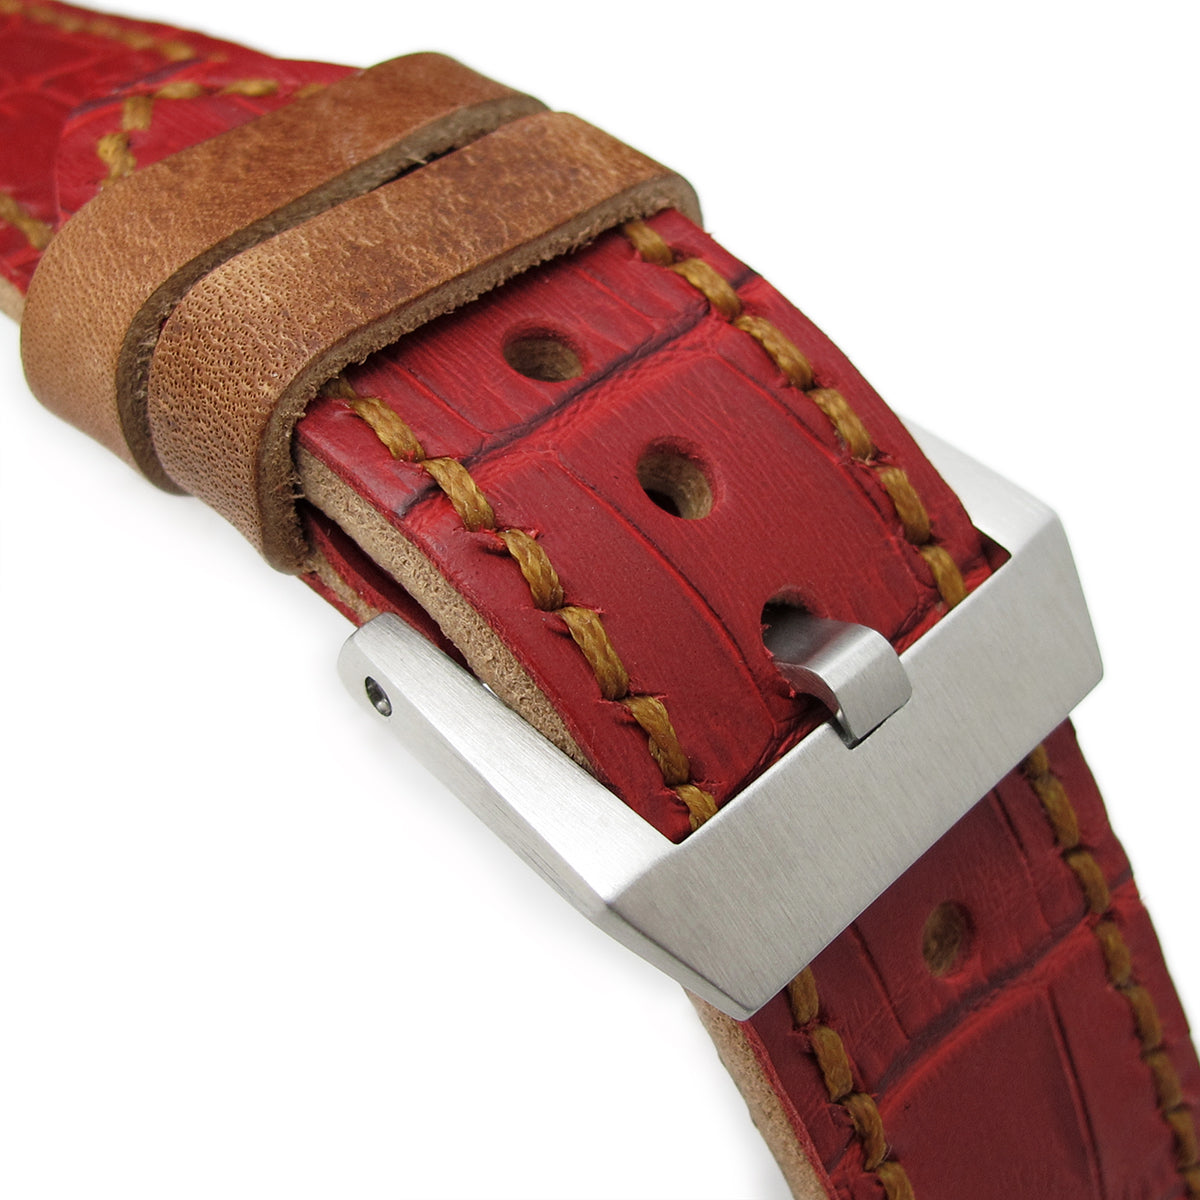 24mm MiLTAT Antipode Watch Strap Matte Red CrocoCalf in Tan Hand Stitches Strapcode Watch Bands